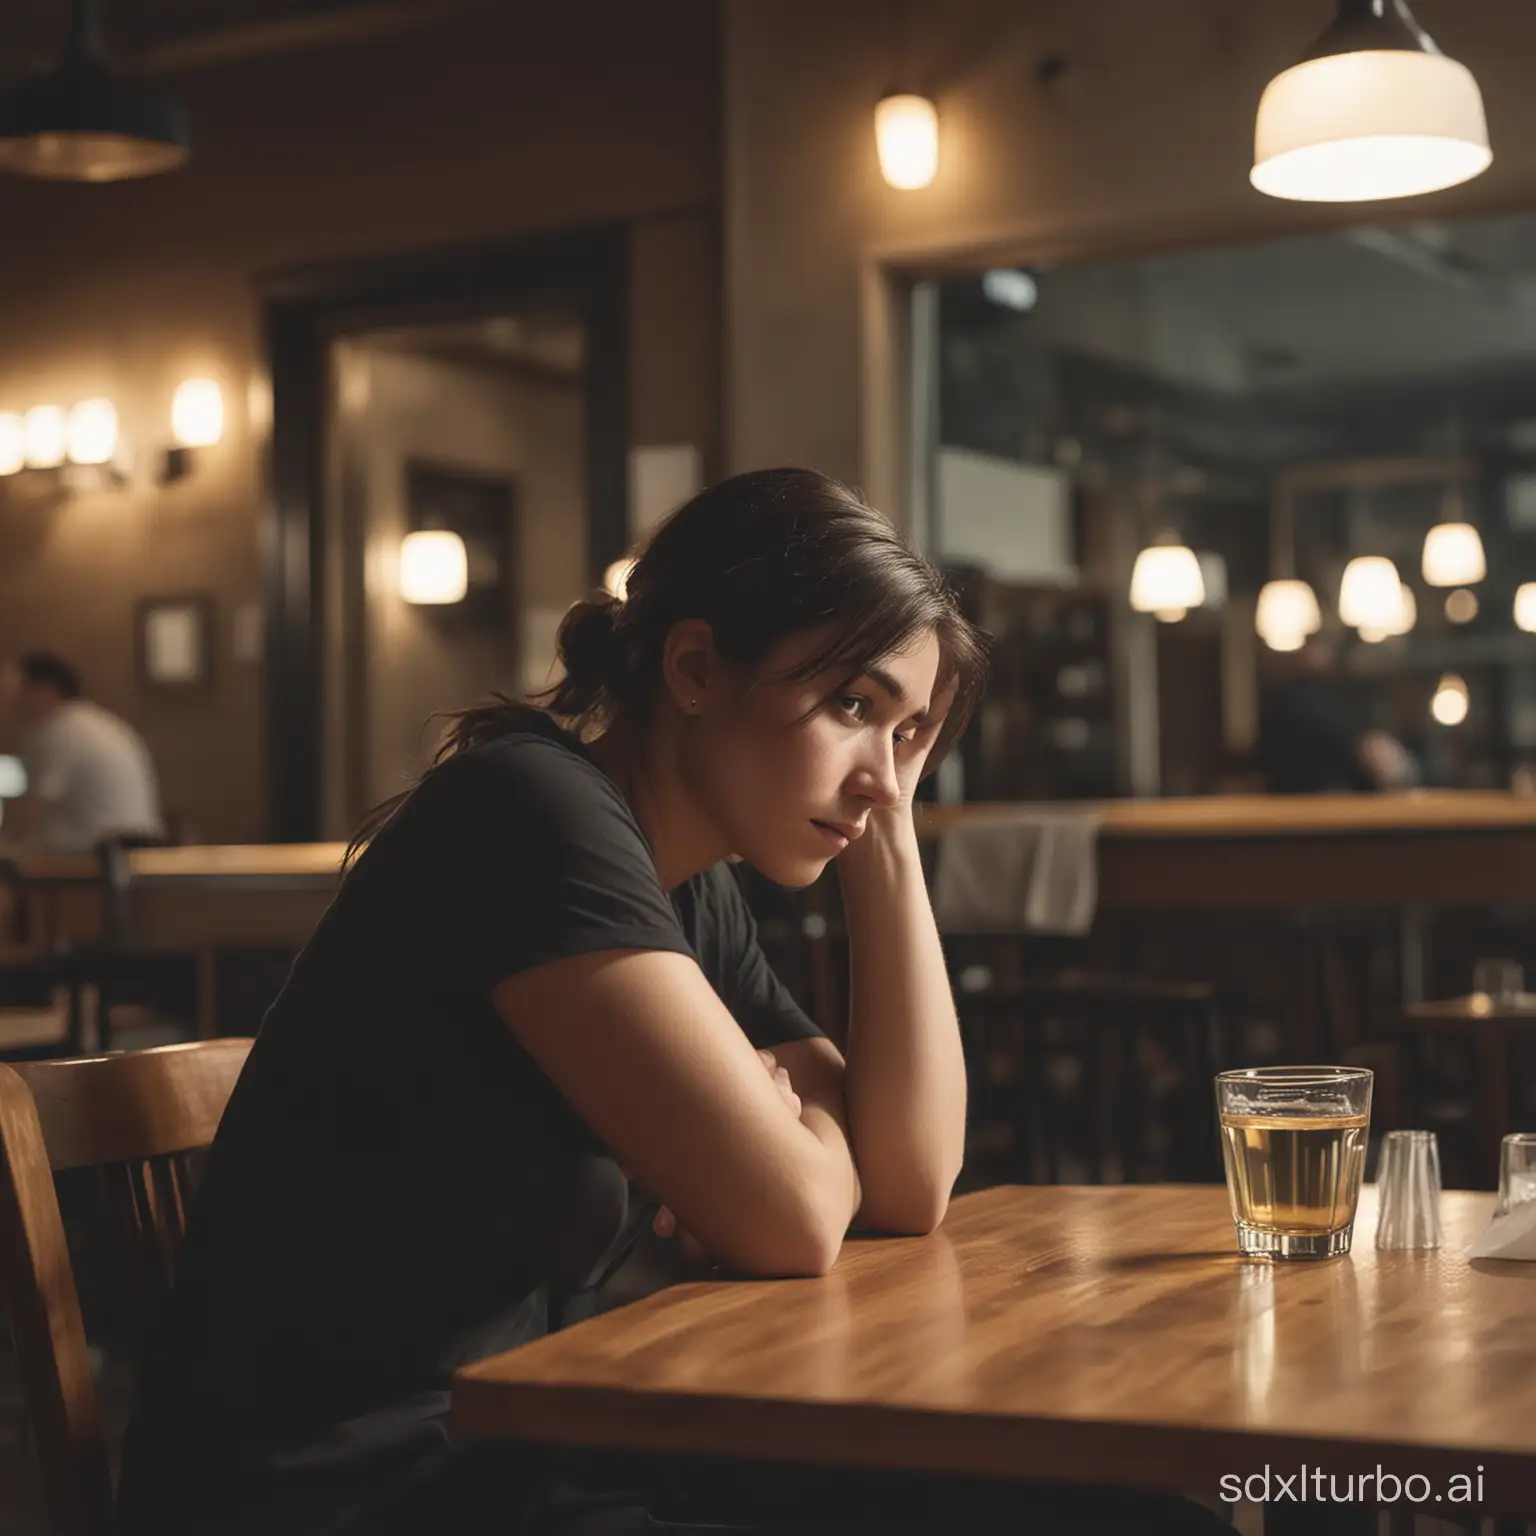 Lonely-Diner-at-a-Dimly-Lit-Restaurant-Portrait-of-Solitude-and-Melancholy